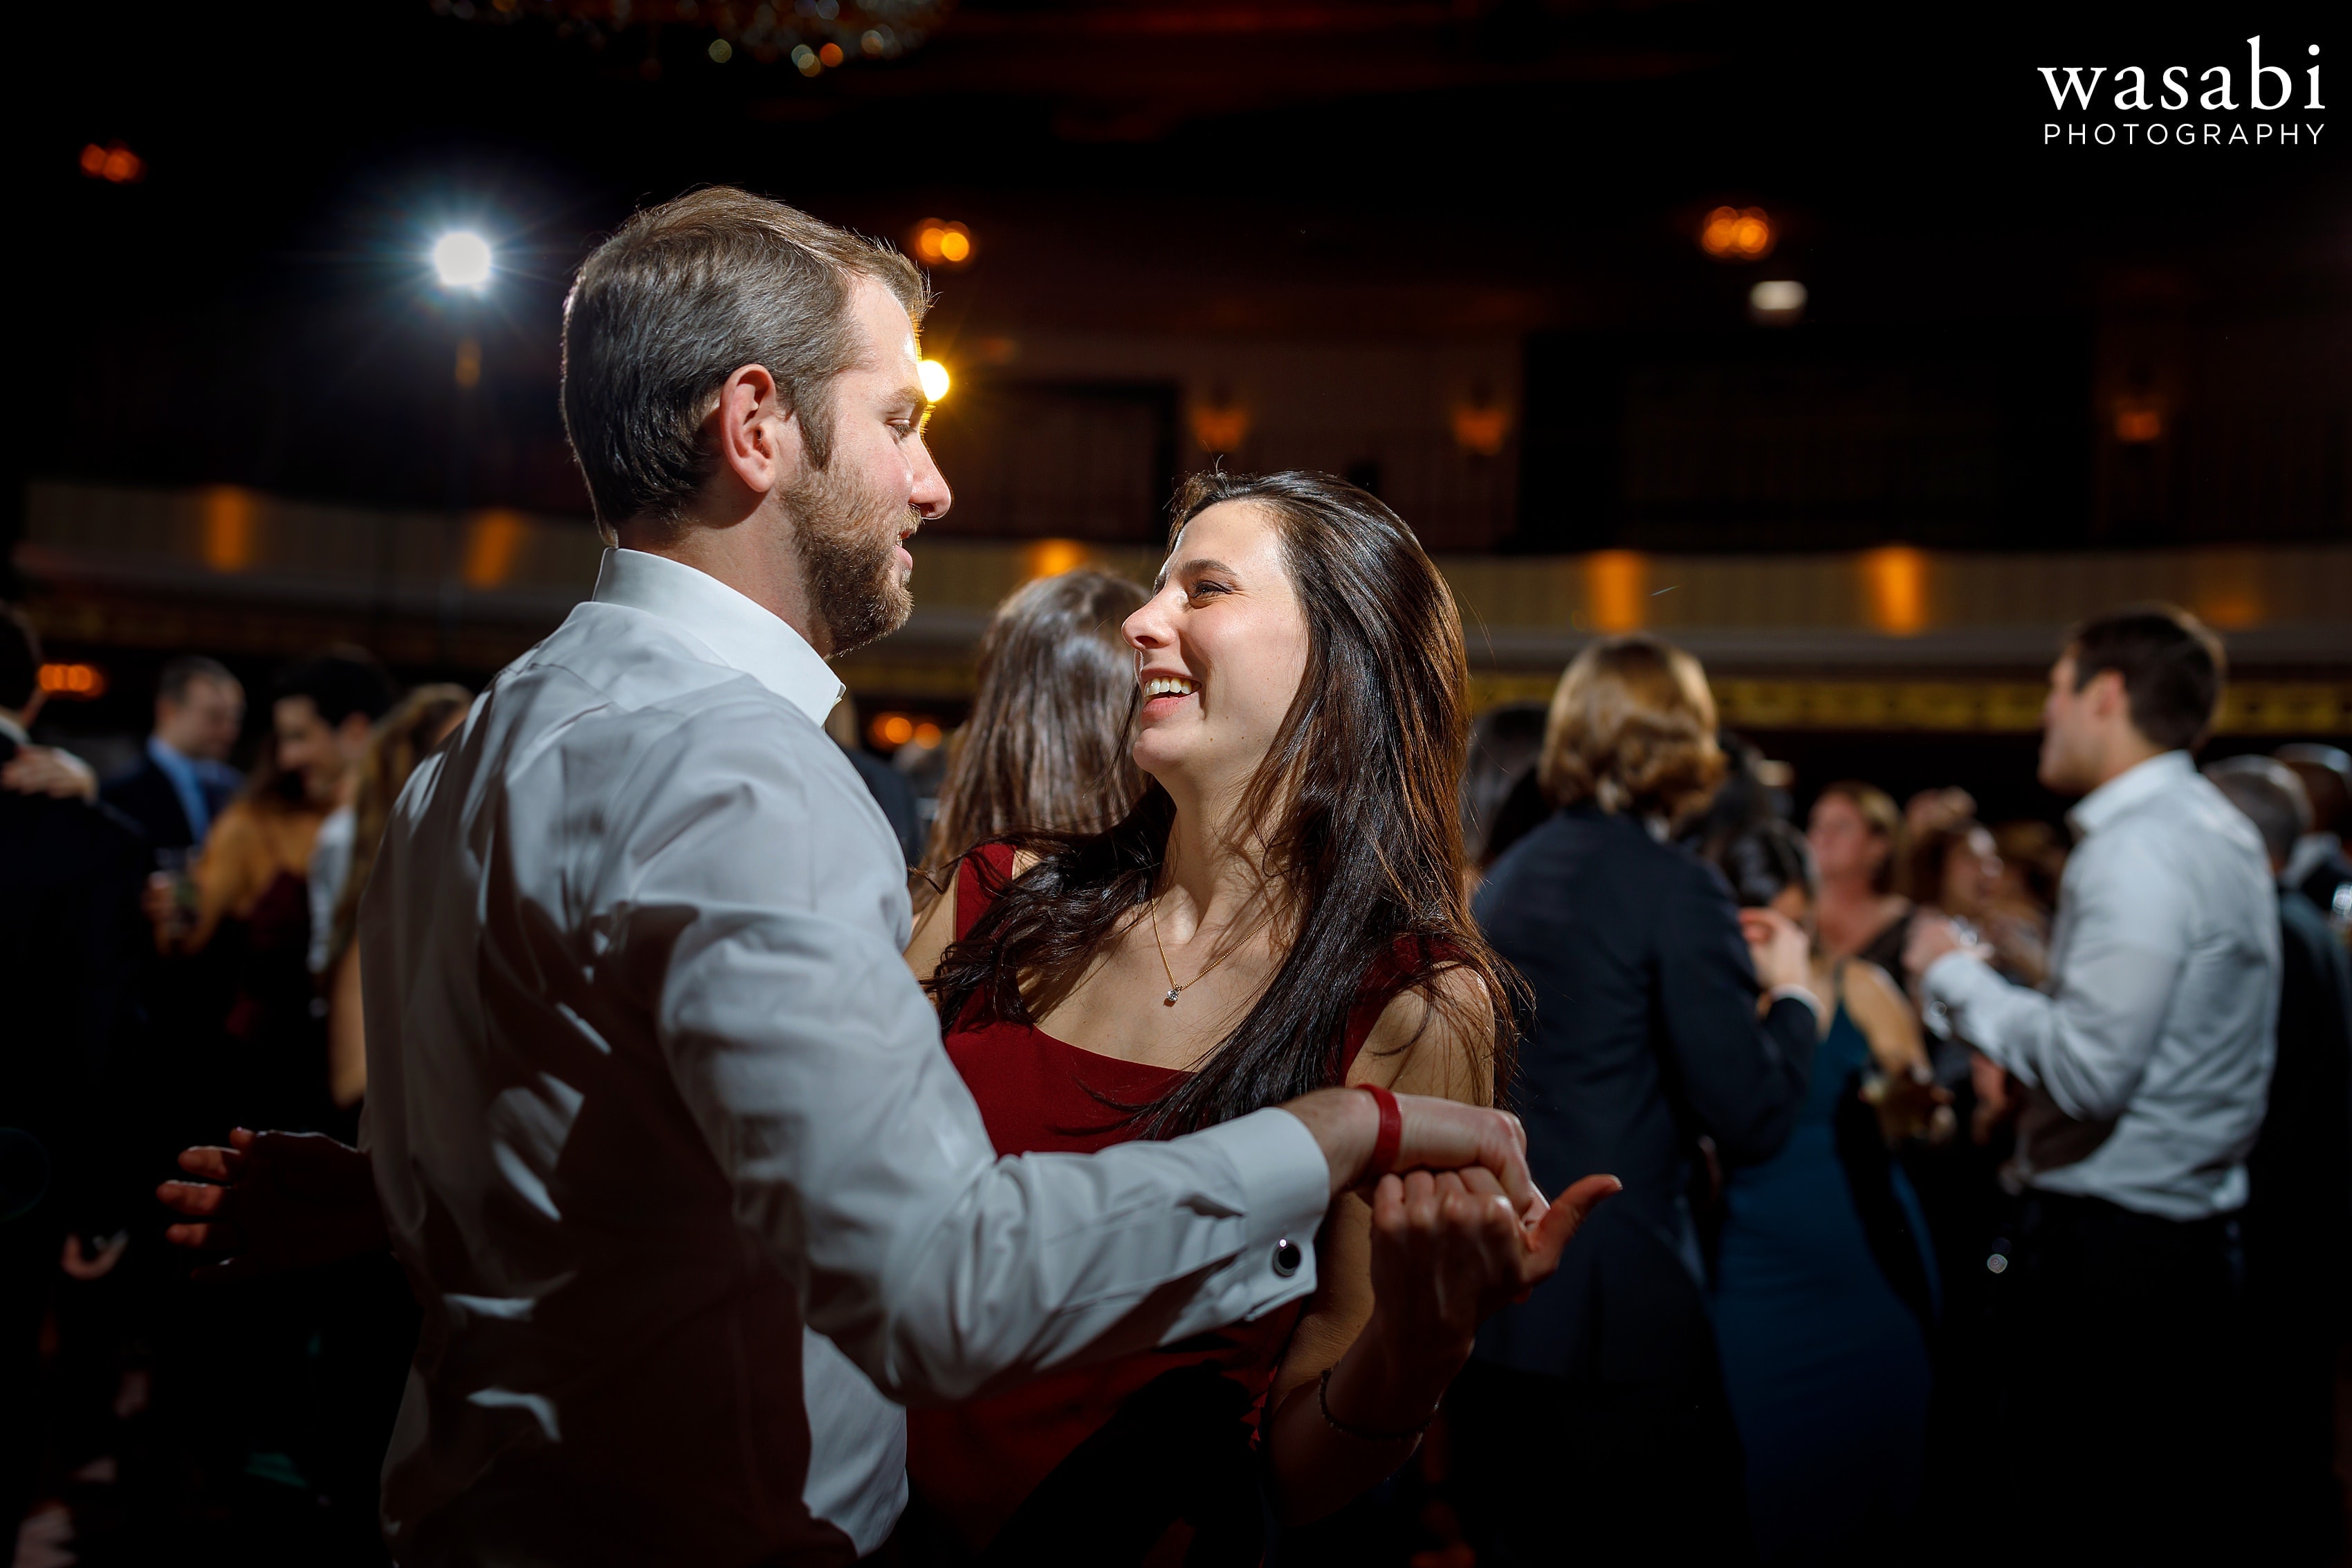 Guests dance during InterContinental Chicago Magnificent Mile Hotel wedding reception